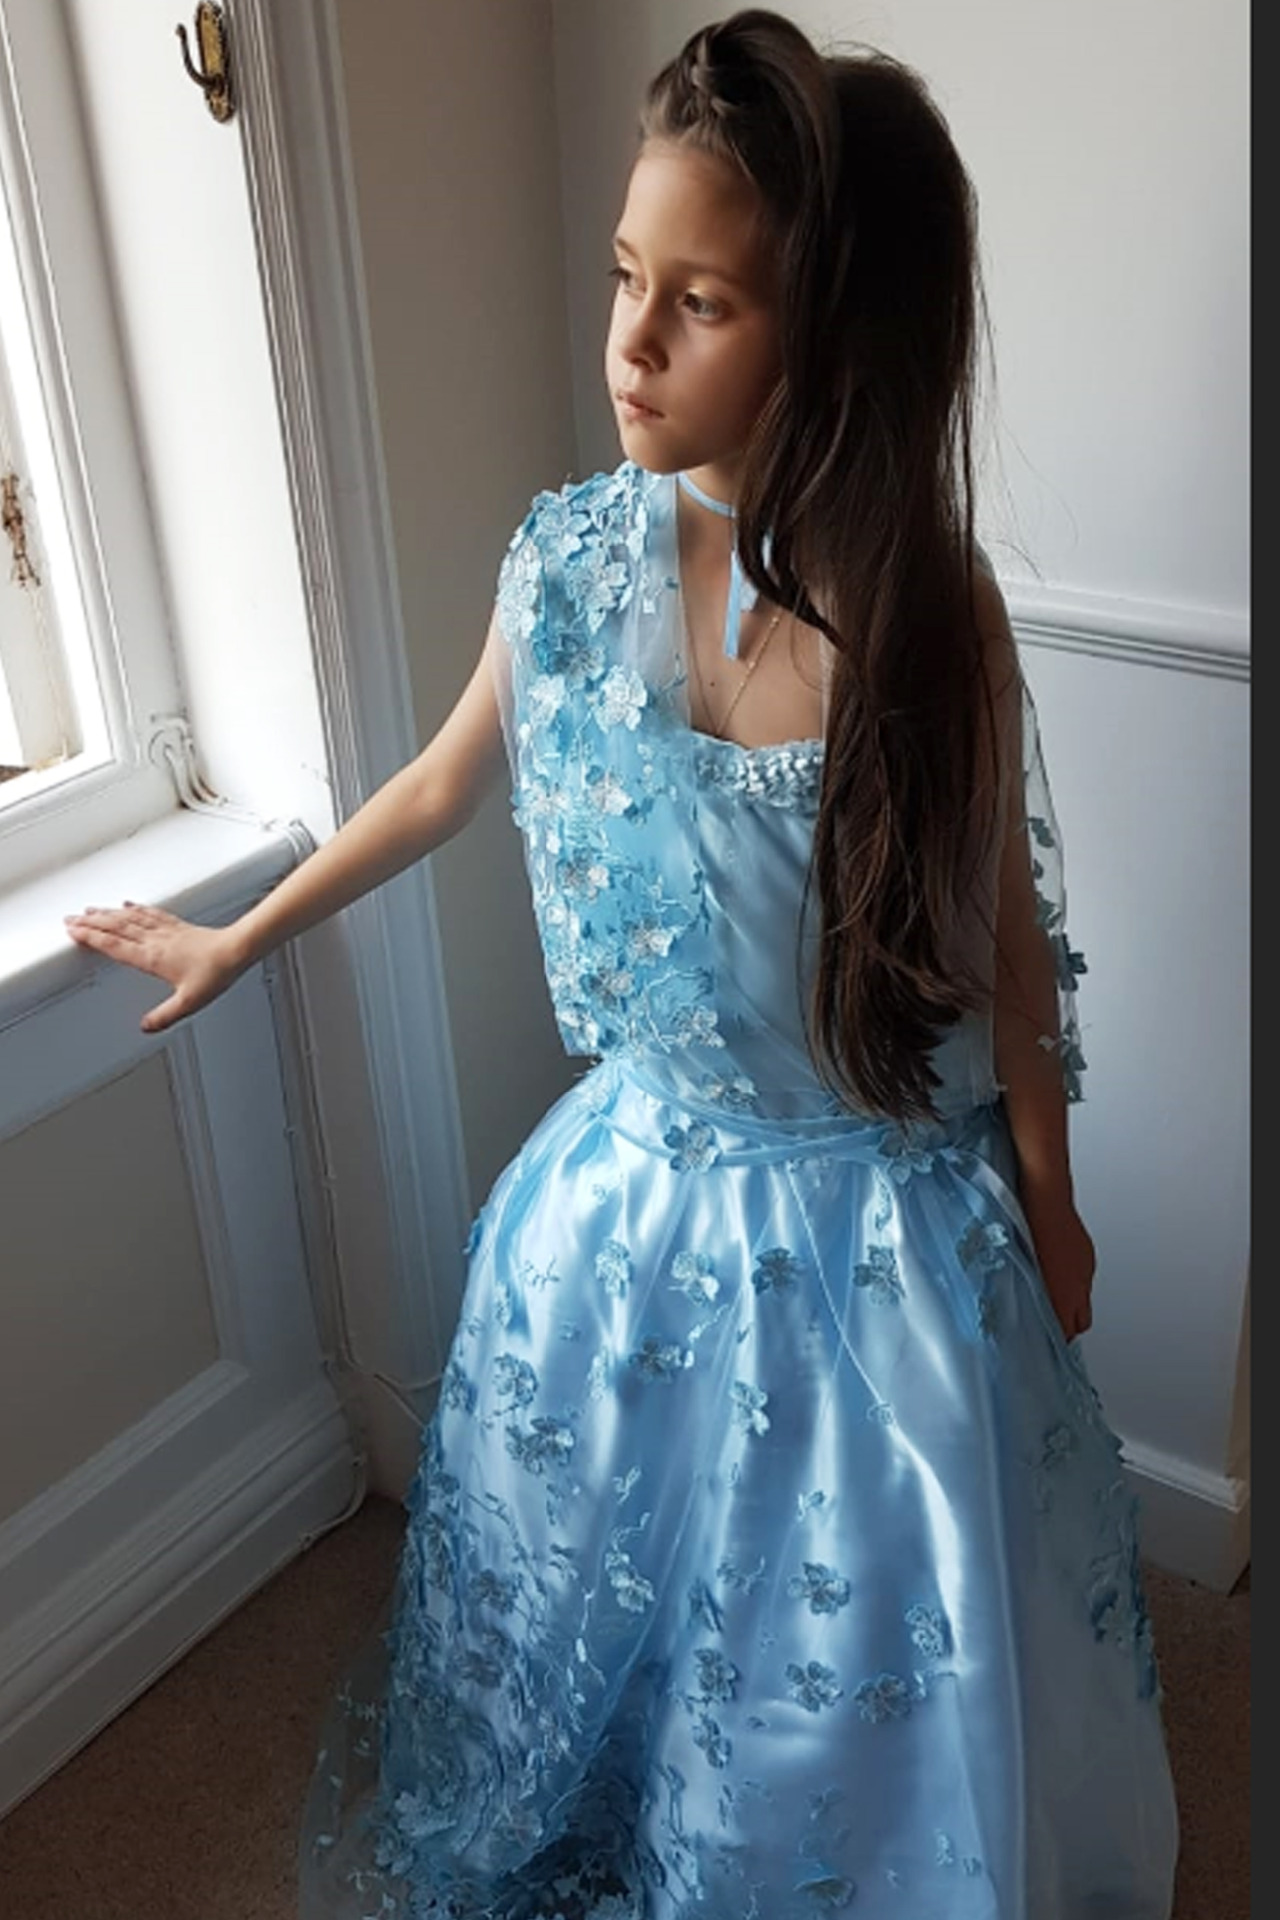 Blue Hydrangea Couture Dress by Miashan - Beautiful hand crafted high fashion for girls